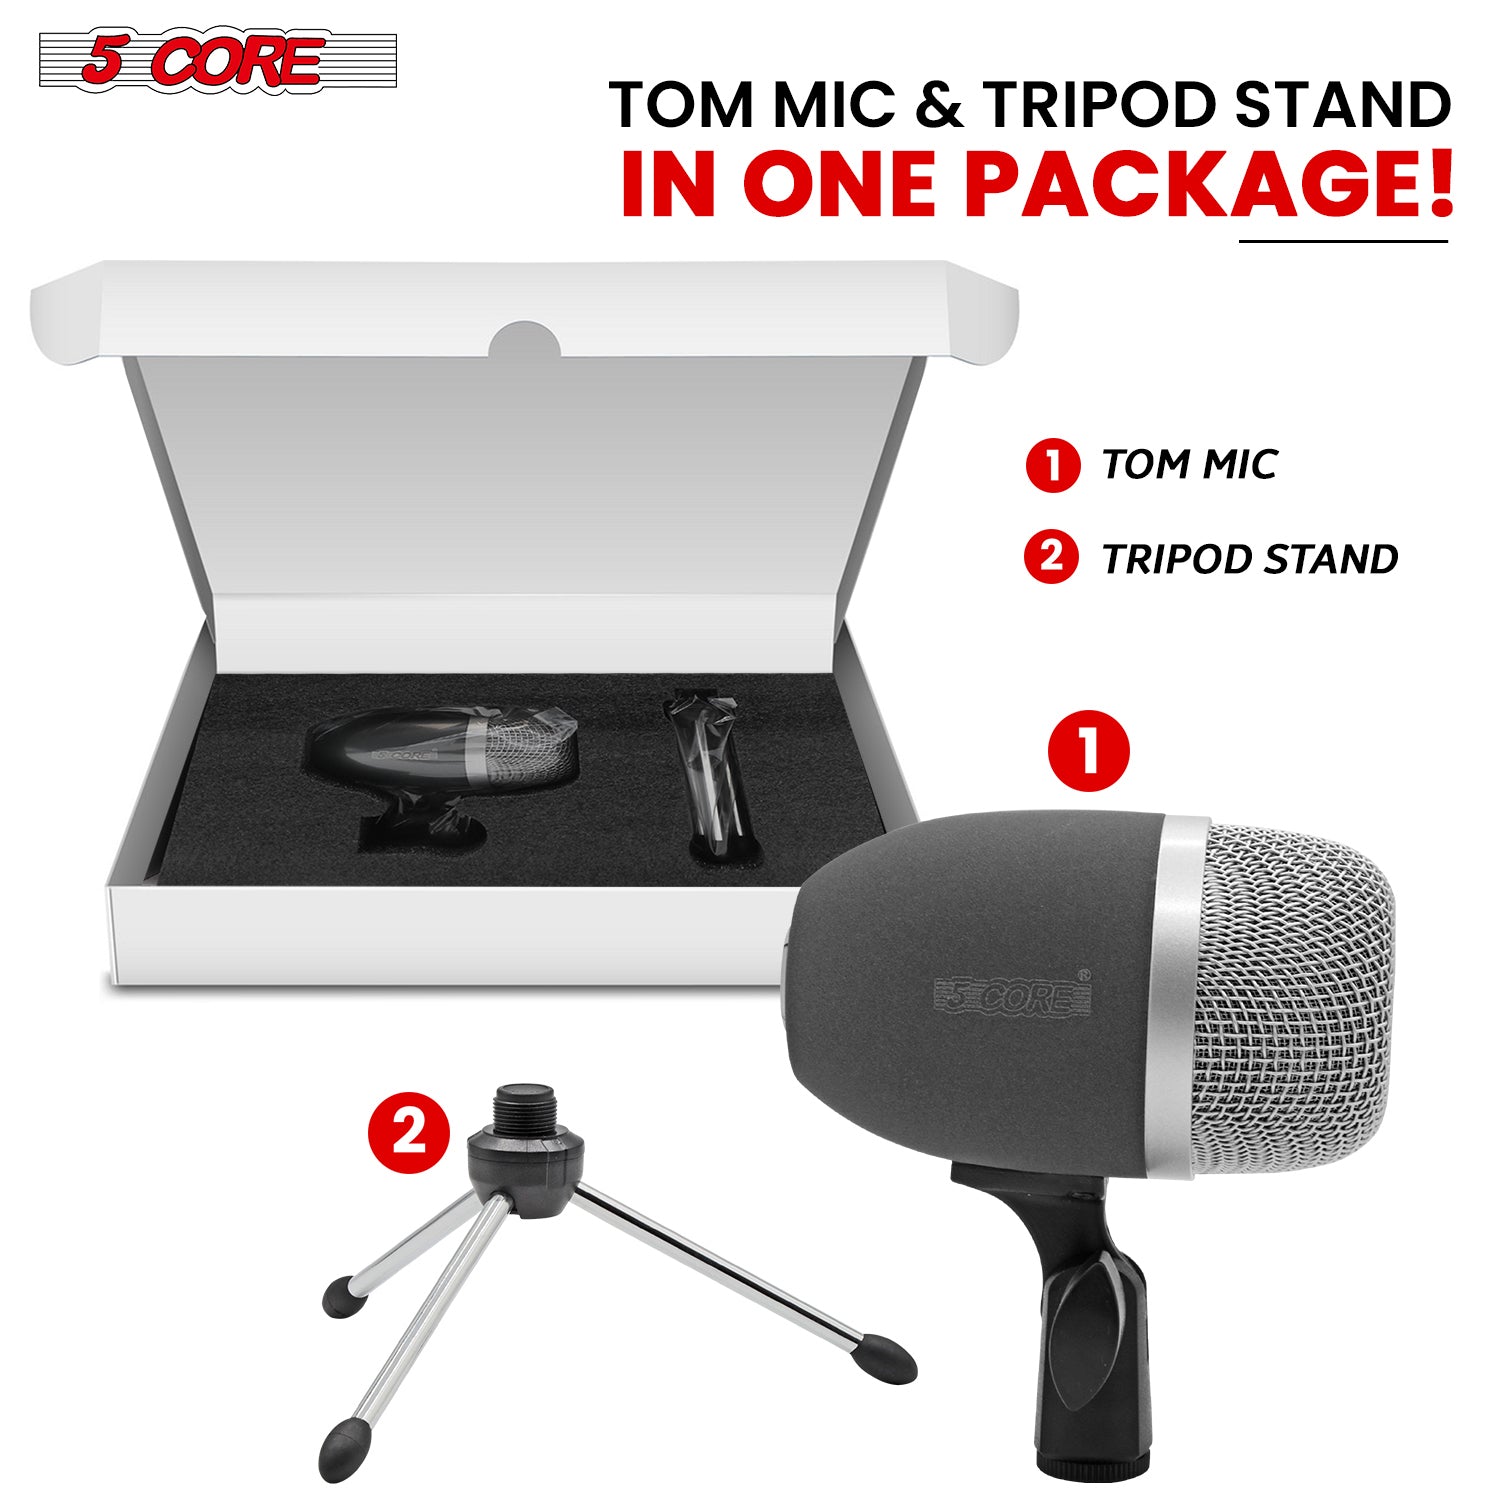 5Core Tom Snare Mic Cardioid Dynamic Microphone for Drum Kit Precision Instrument